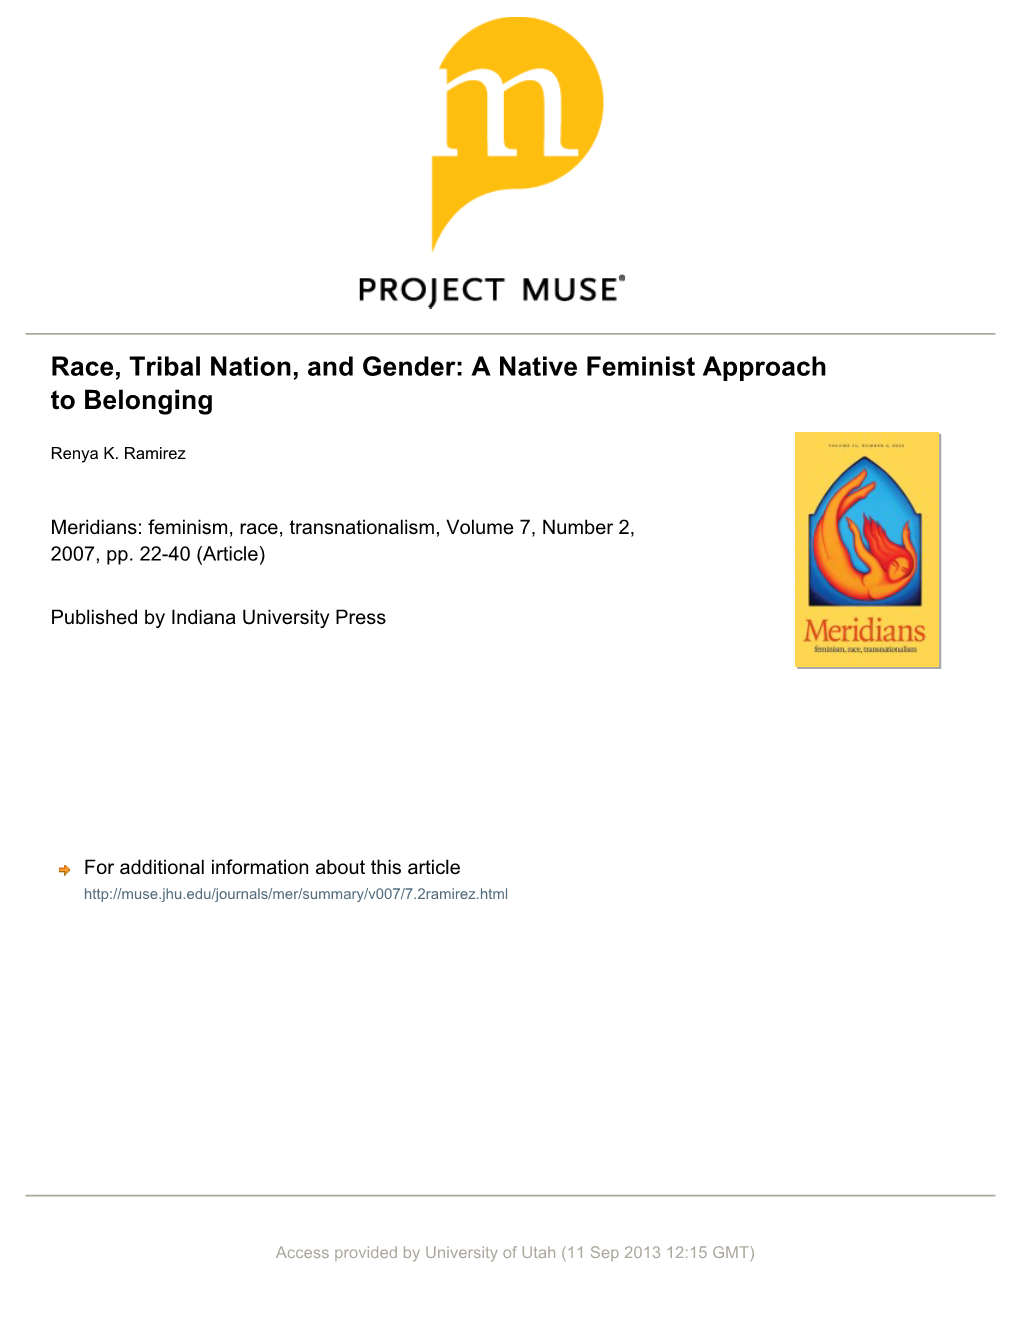 Race, Tribal Nation, and Gender: a Native Feminist Approach to Belonging